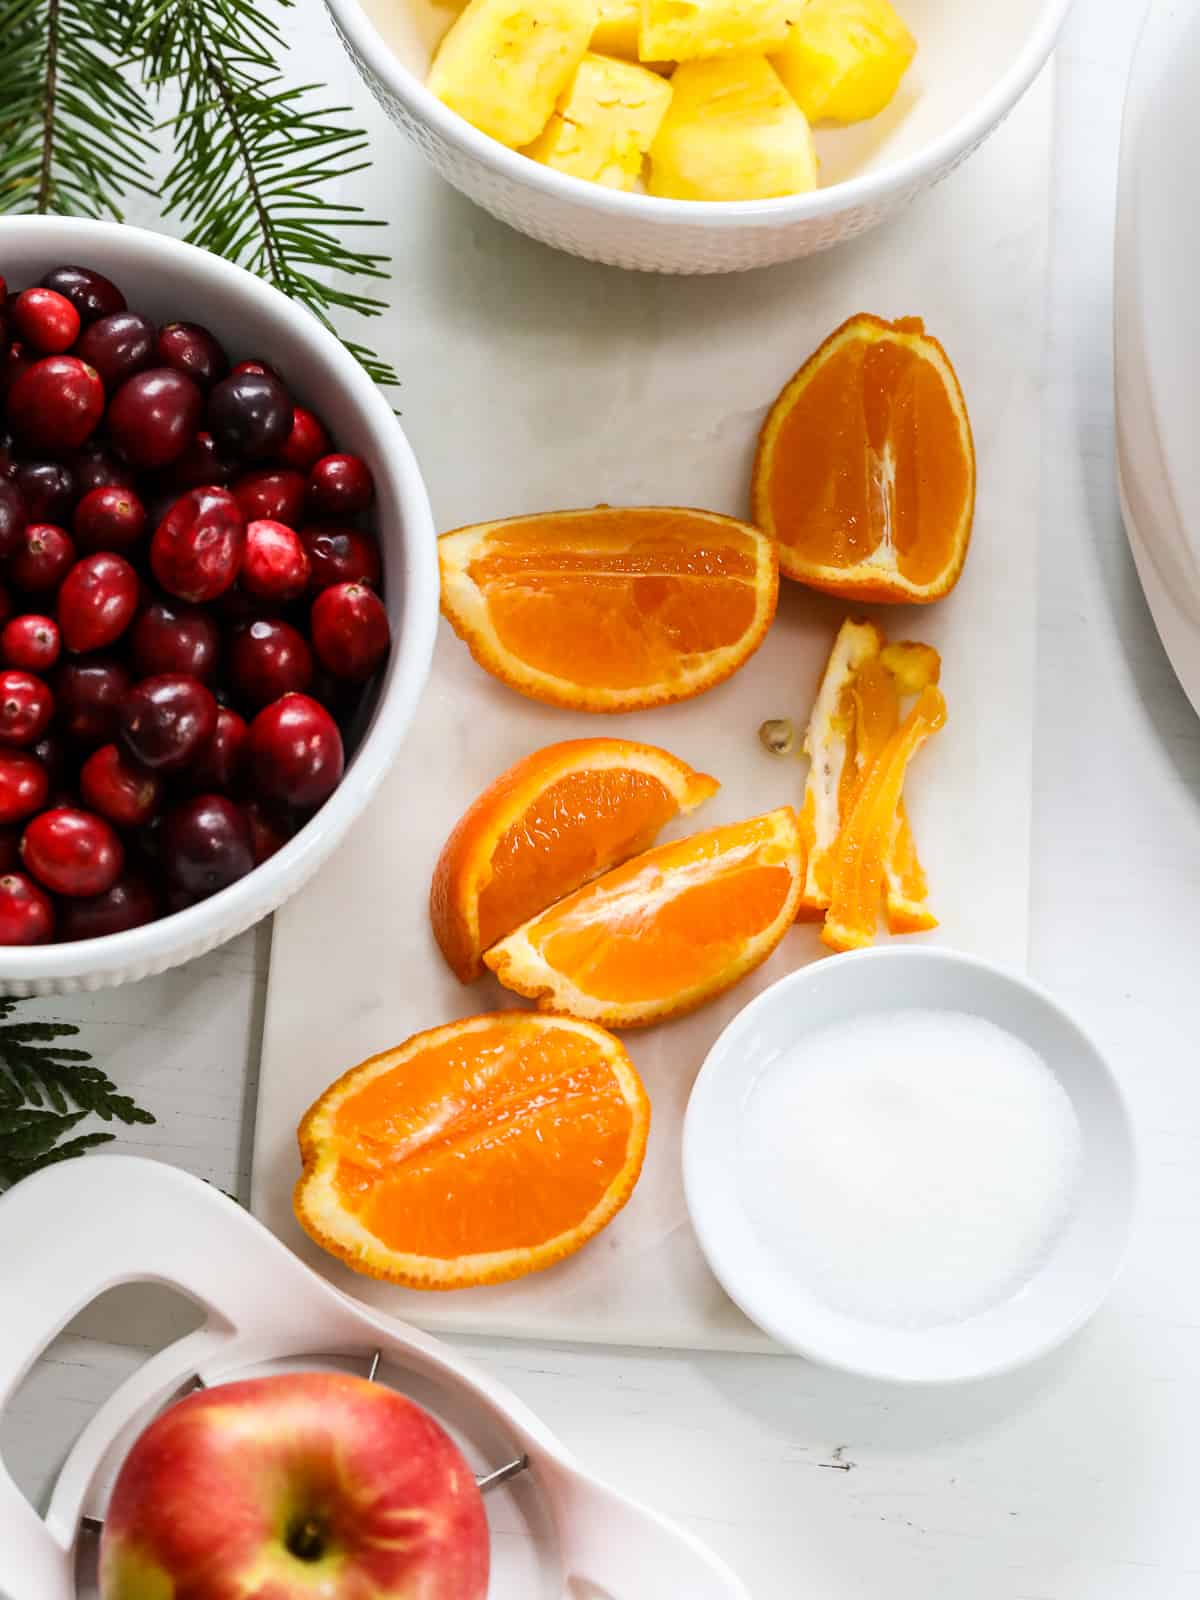 The ingredients to make cranberry relish on a white table including cranberries, oranges, apple , and sugar.